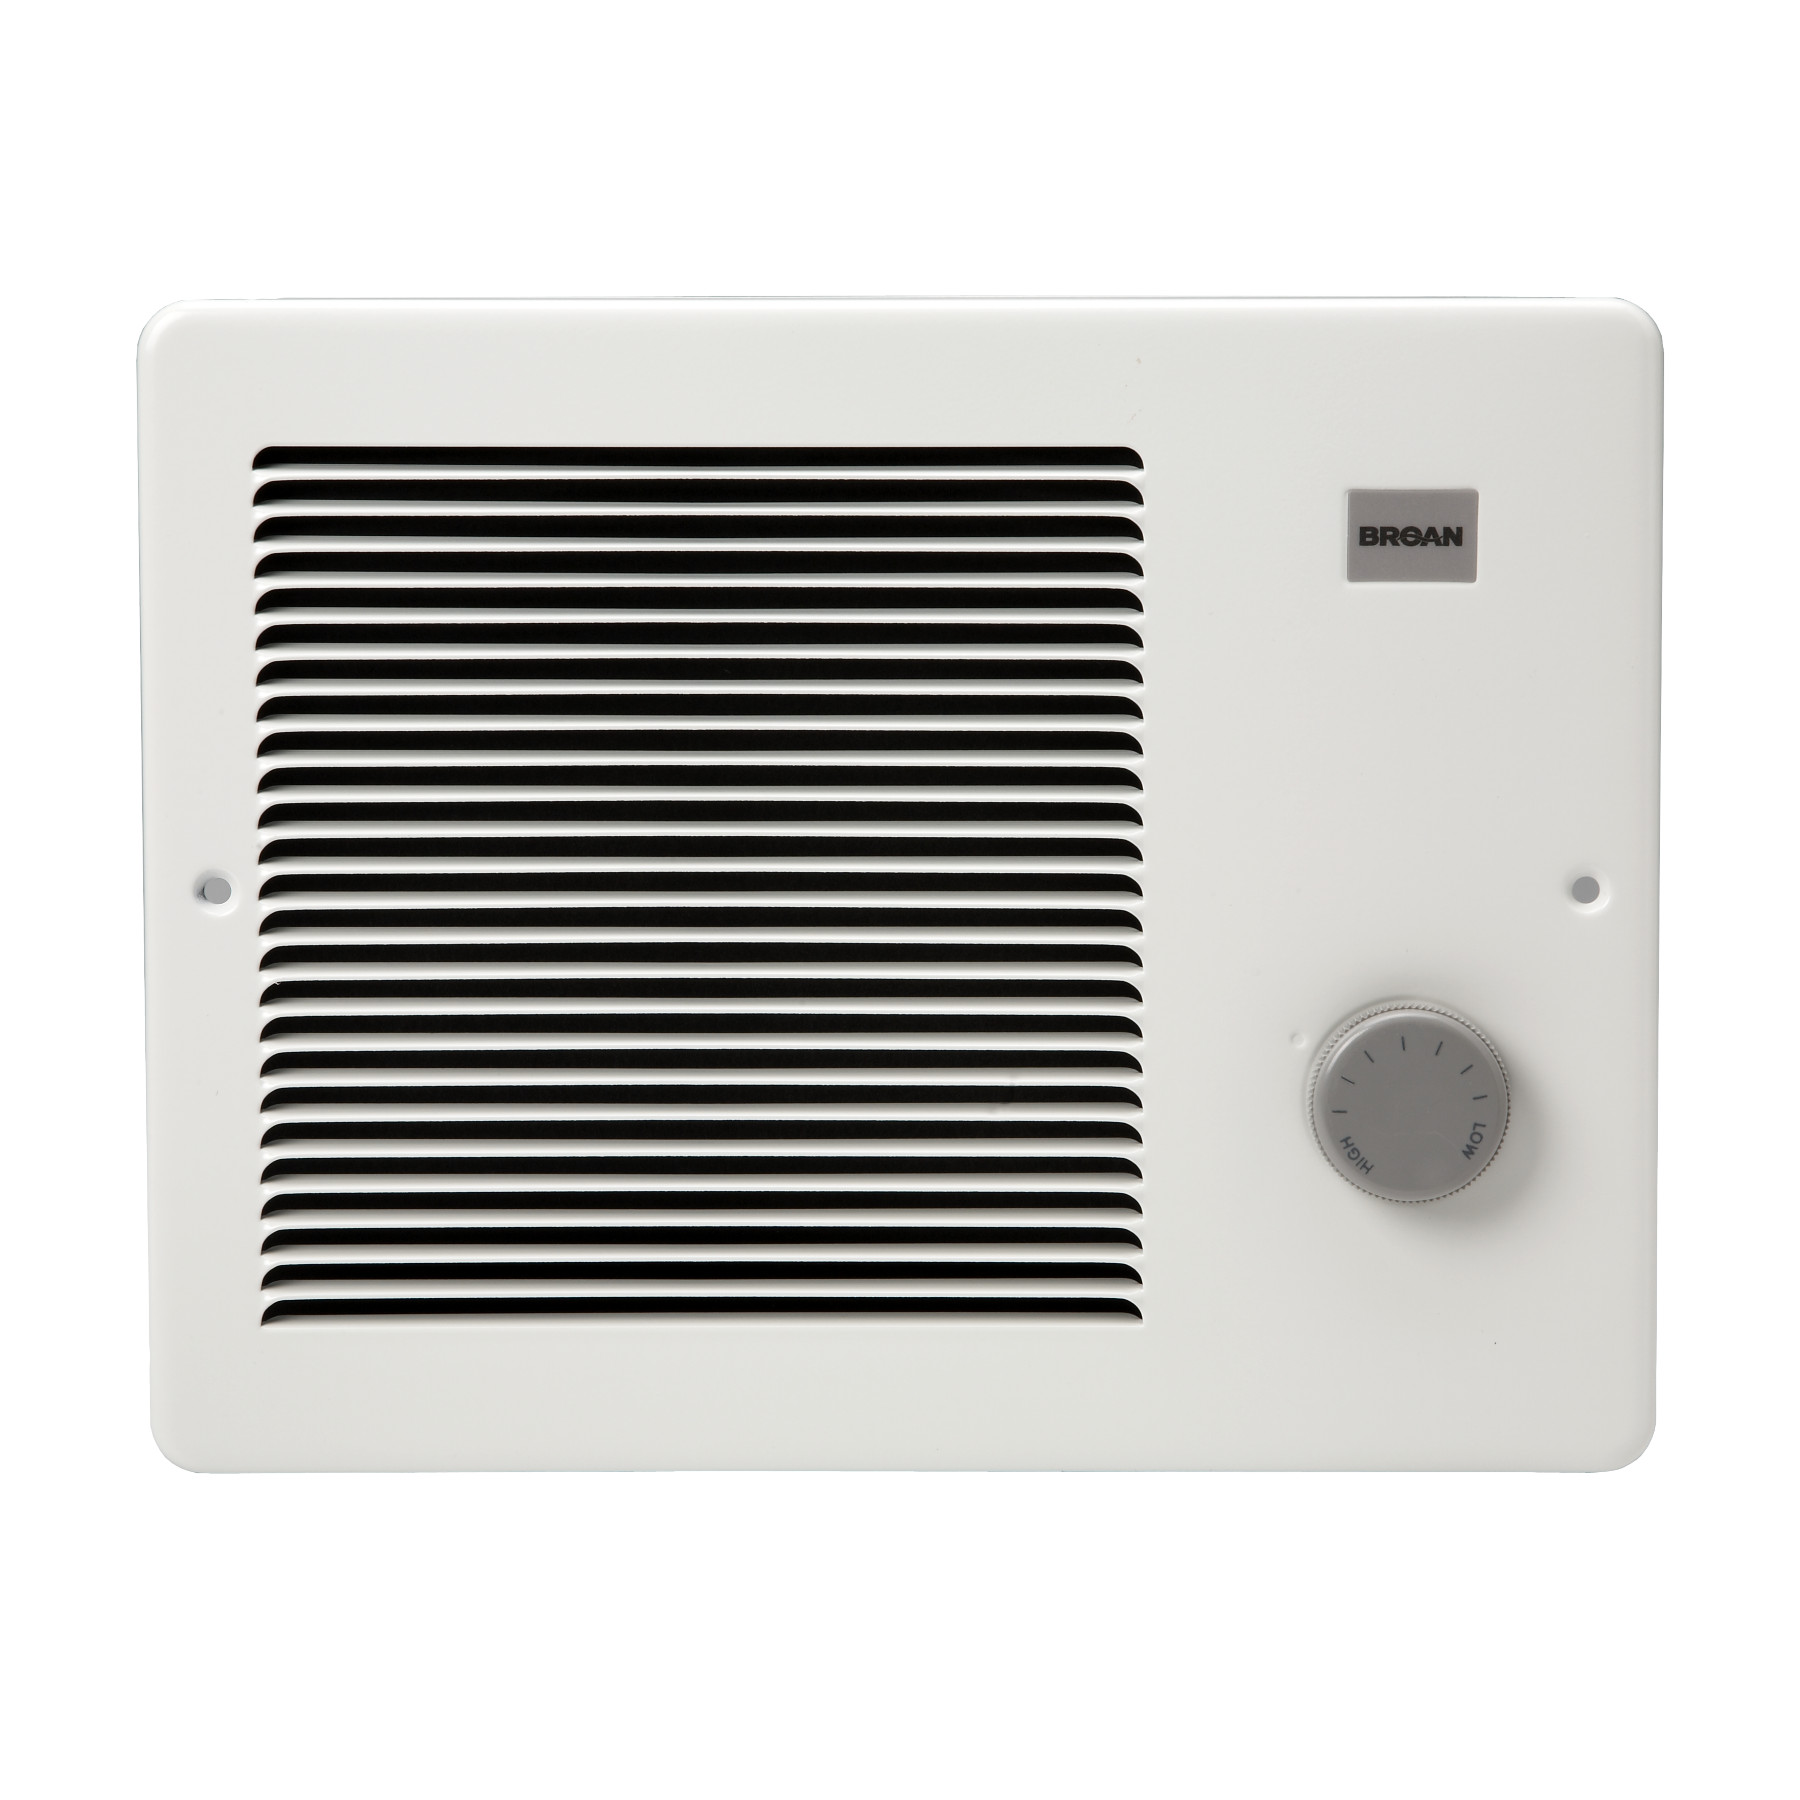 Broan 114 White Kickspace Heater without Built-in Thermostat 